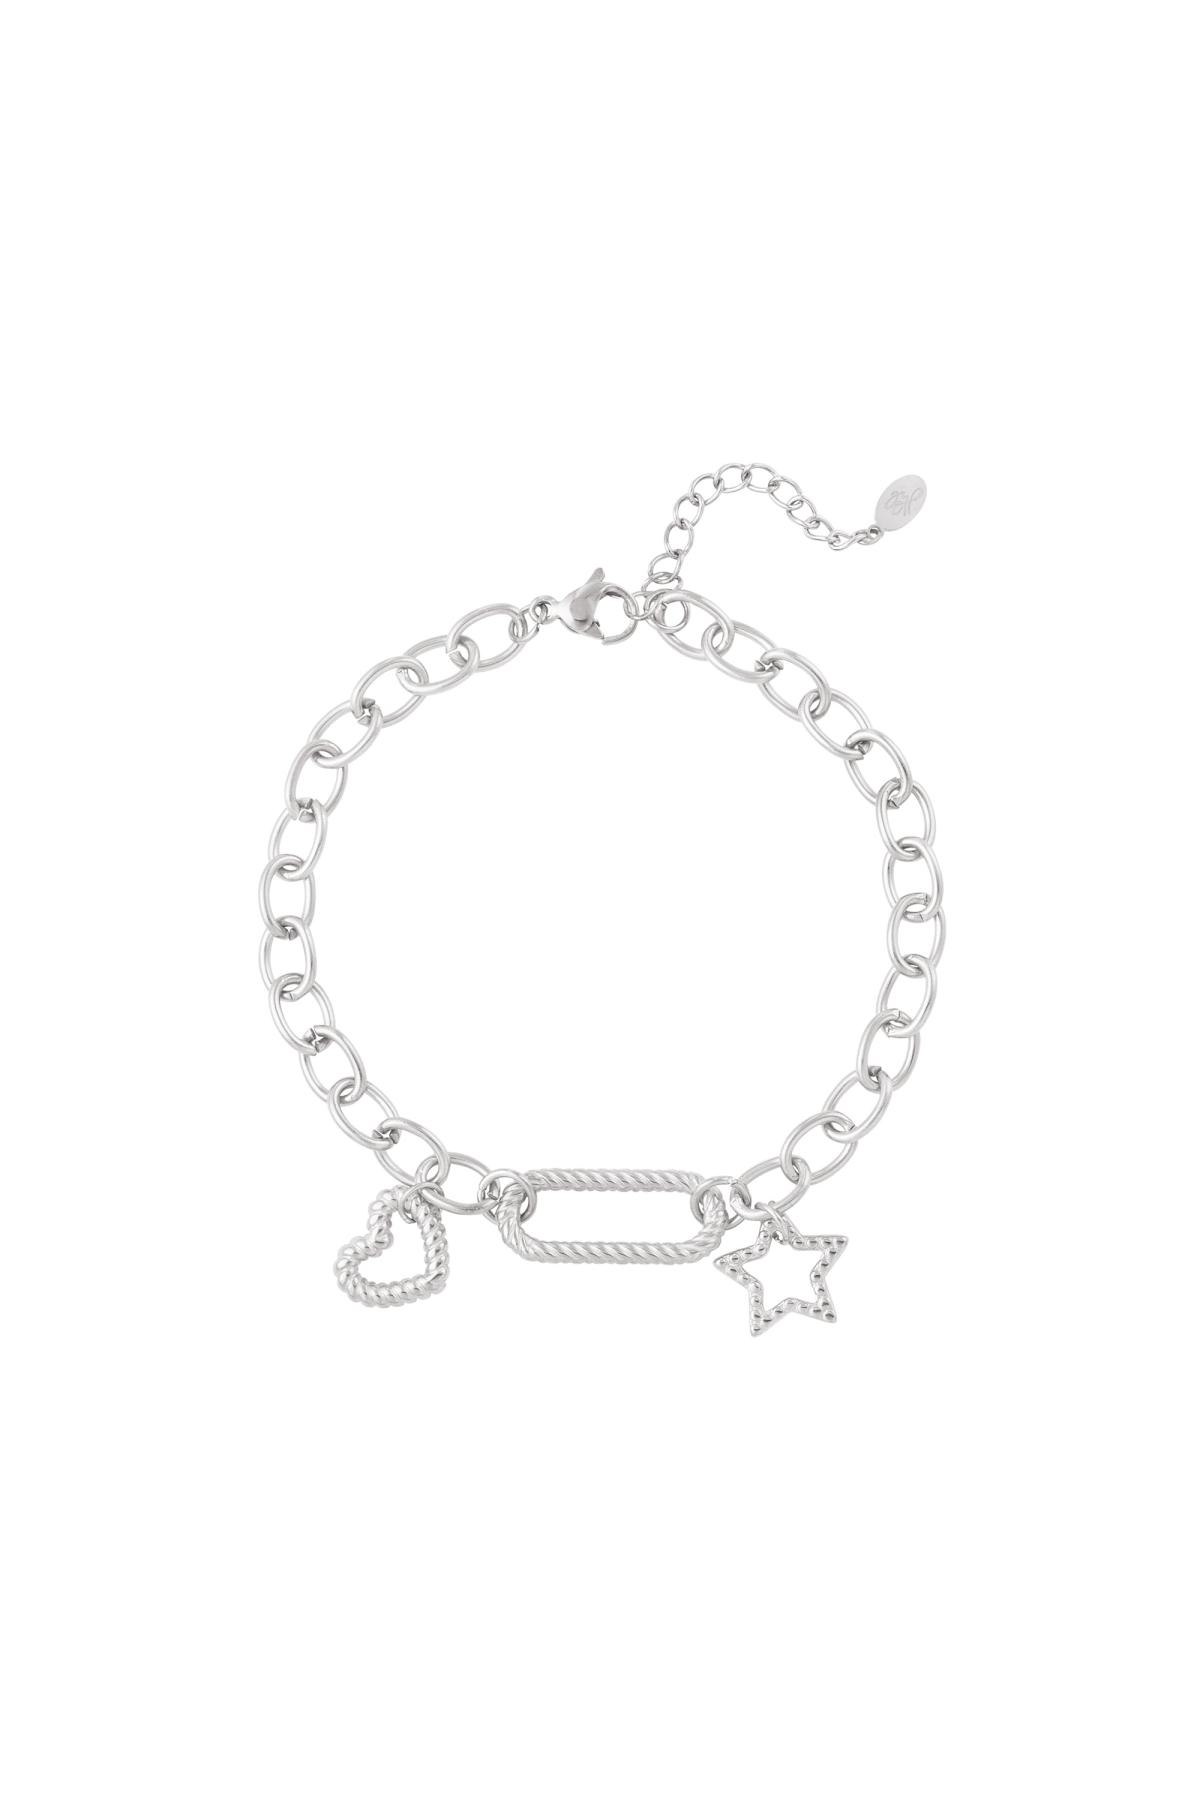 Bracelet with pendant and charms Silver Stainless Steel